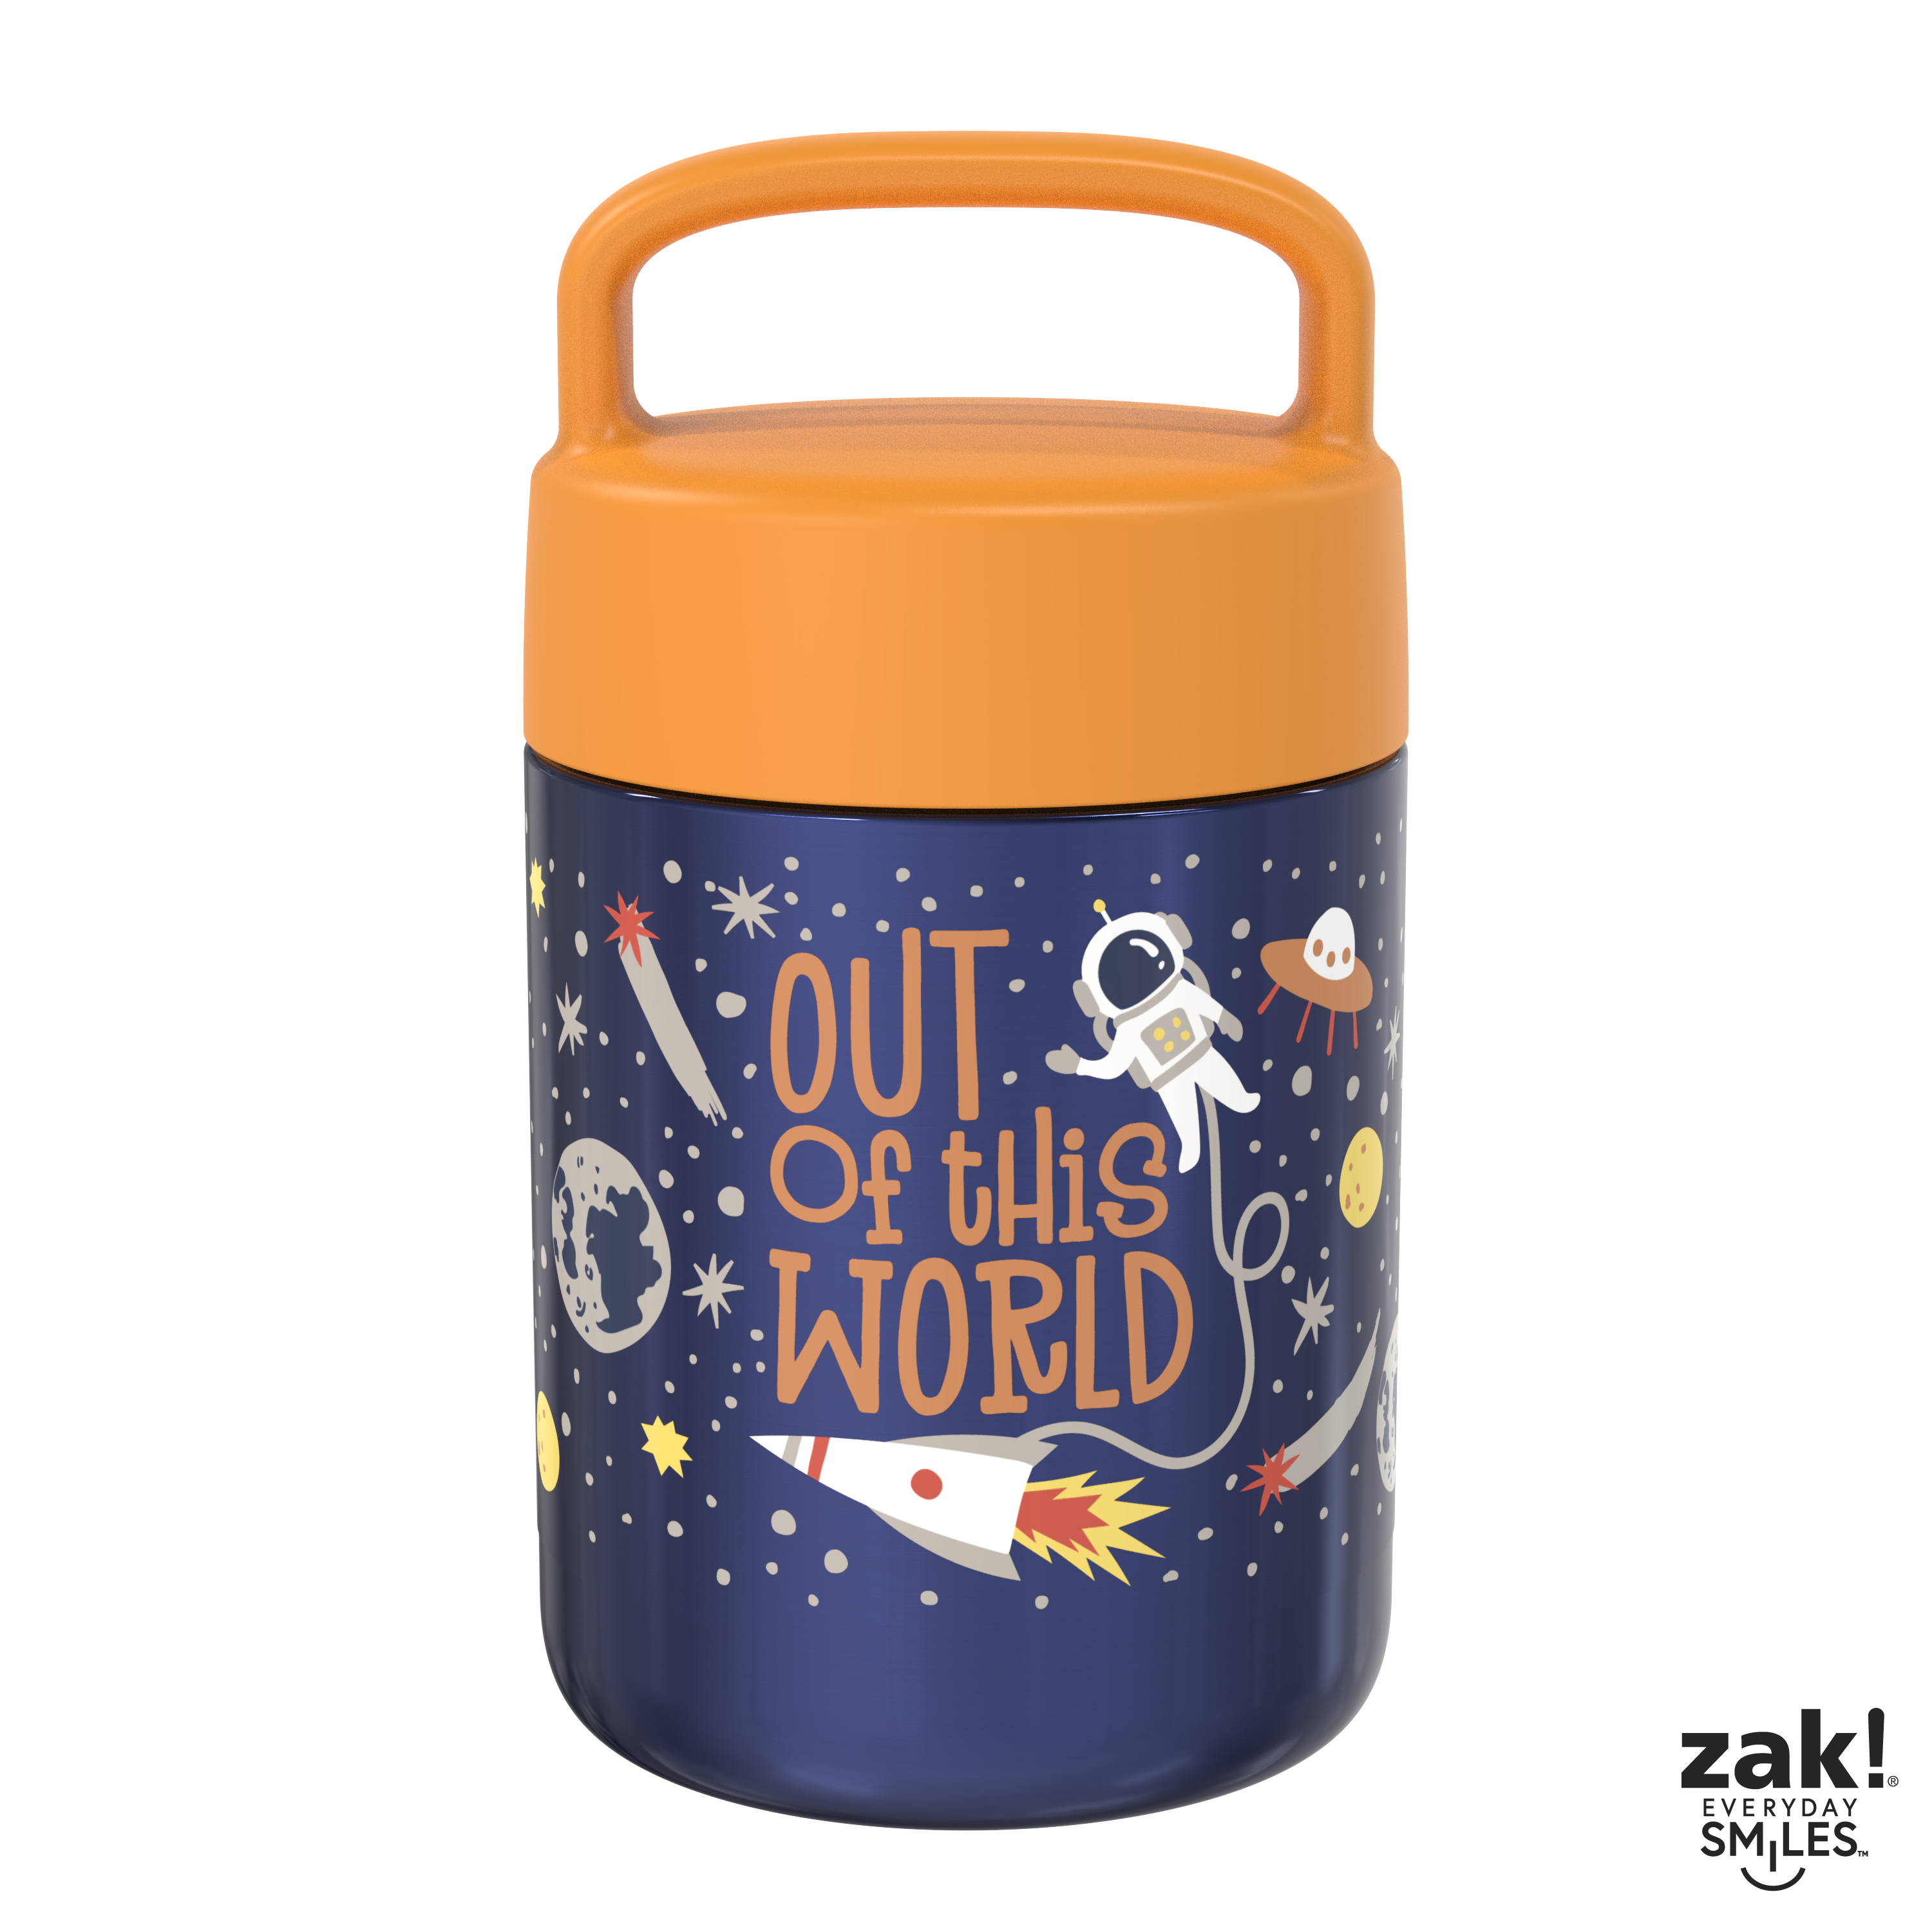 Zak Lunch! Reusable Vacuum Insulated Stainless Steel Food Container, Outer Space slideshow image 2